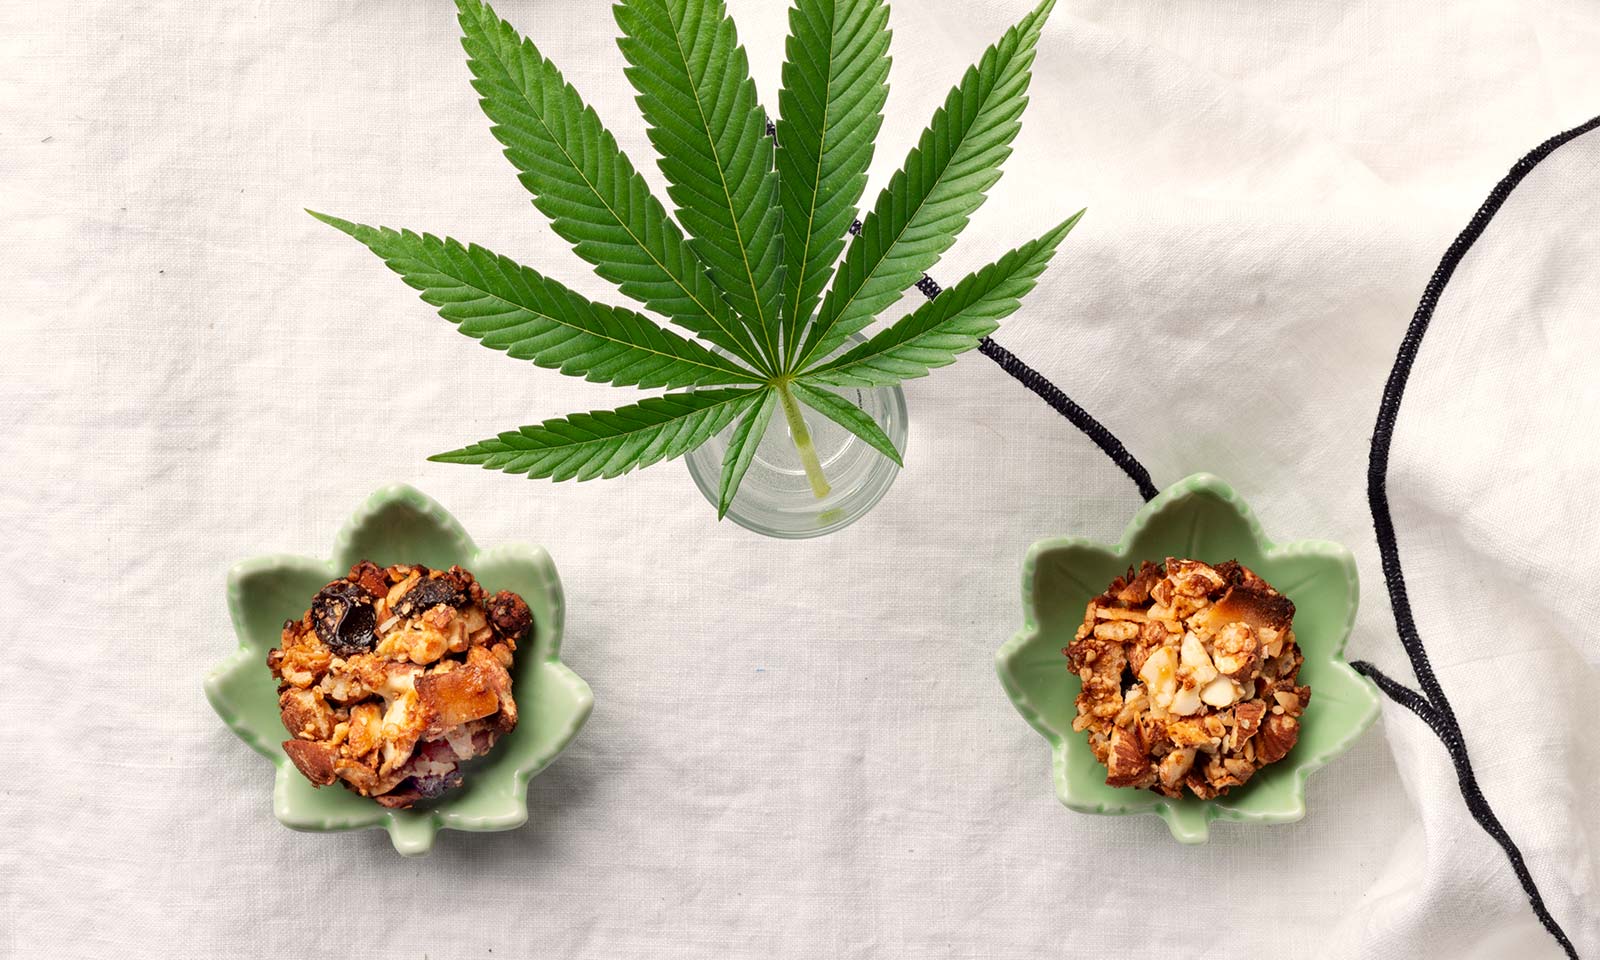 Edibles Recipe: CBD and THC-Infused Energy Bites